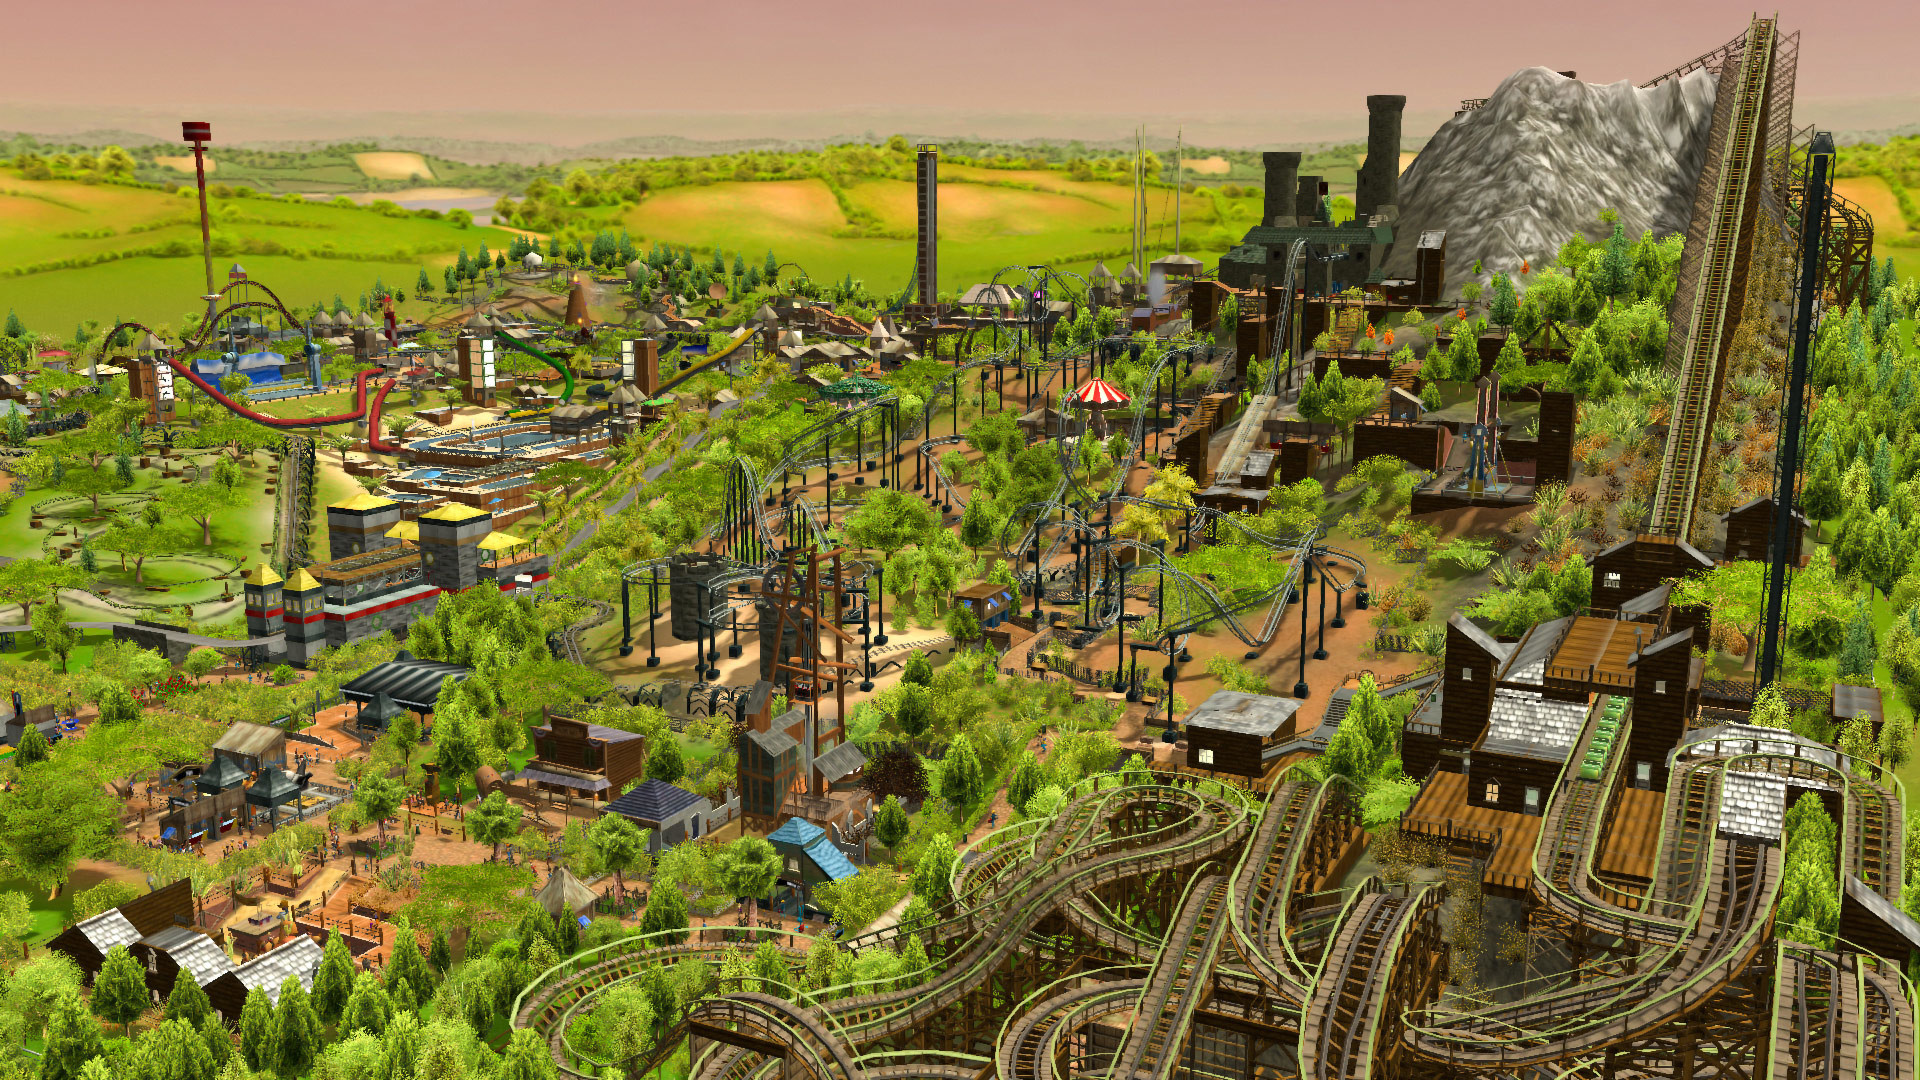 rollercoaster tycoon 3 pc download